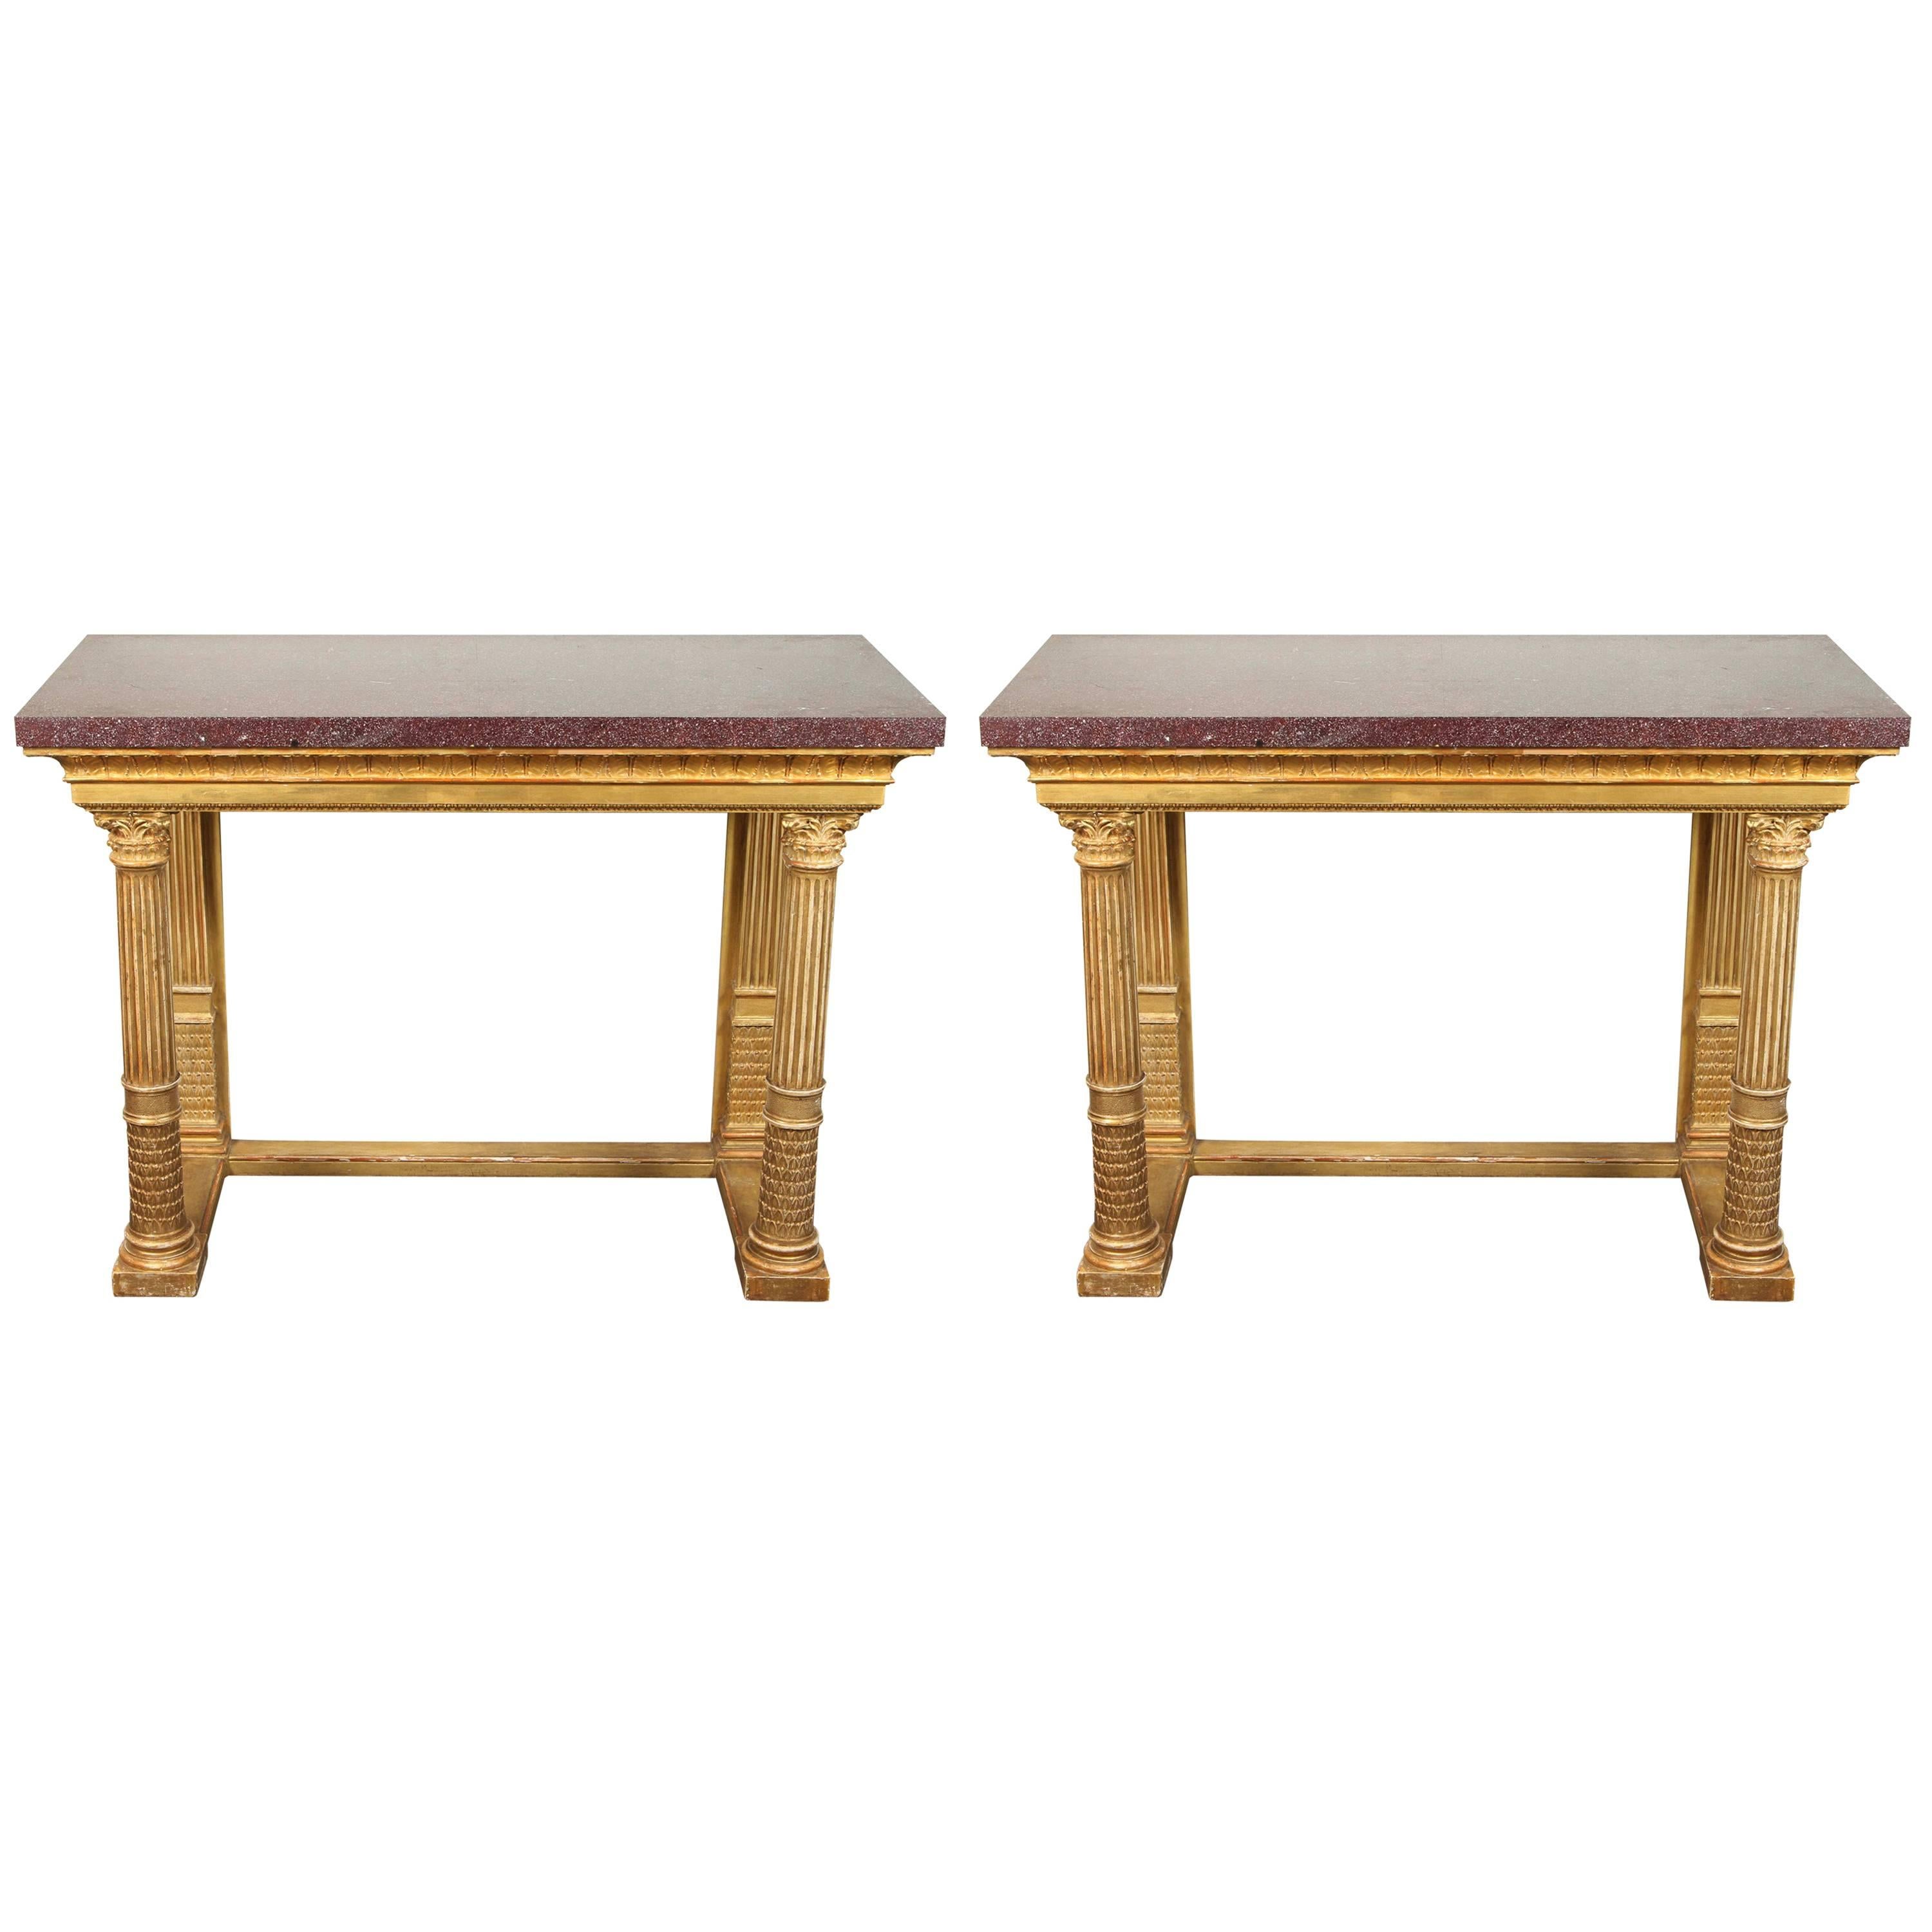 Excellent Pair of 19th Century, Gilded Consoles For Sale